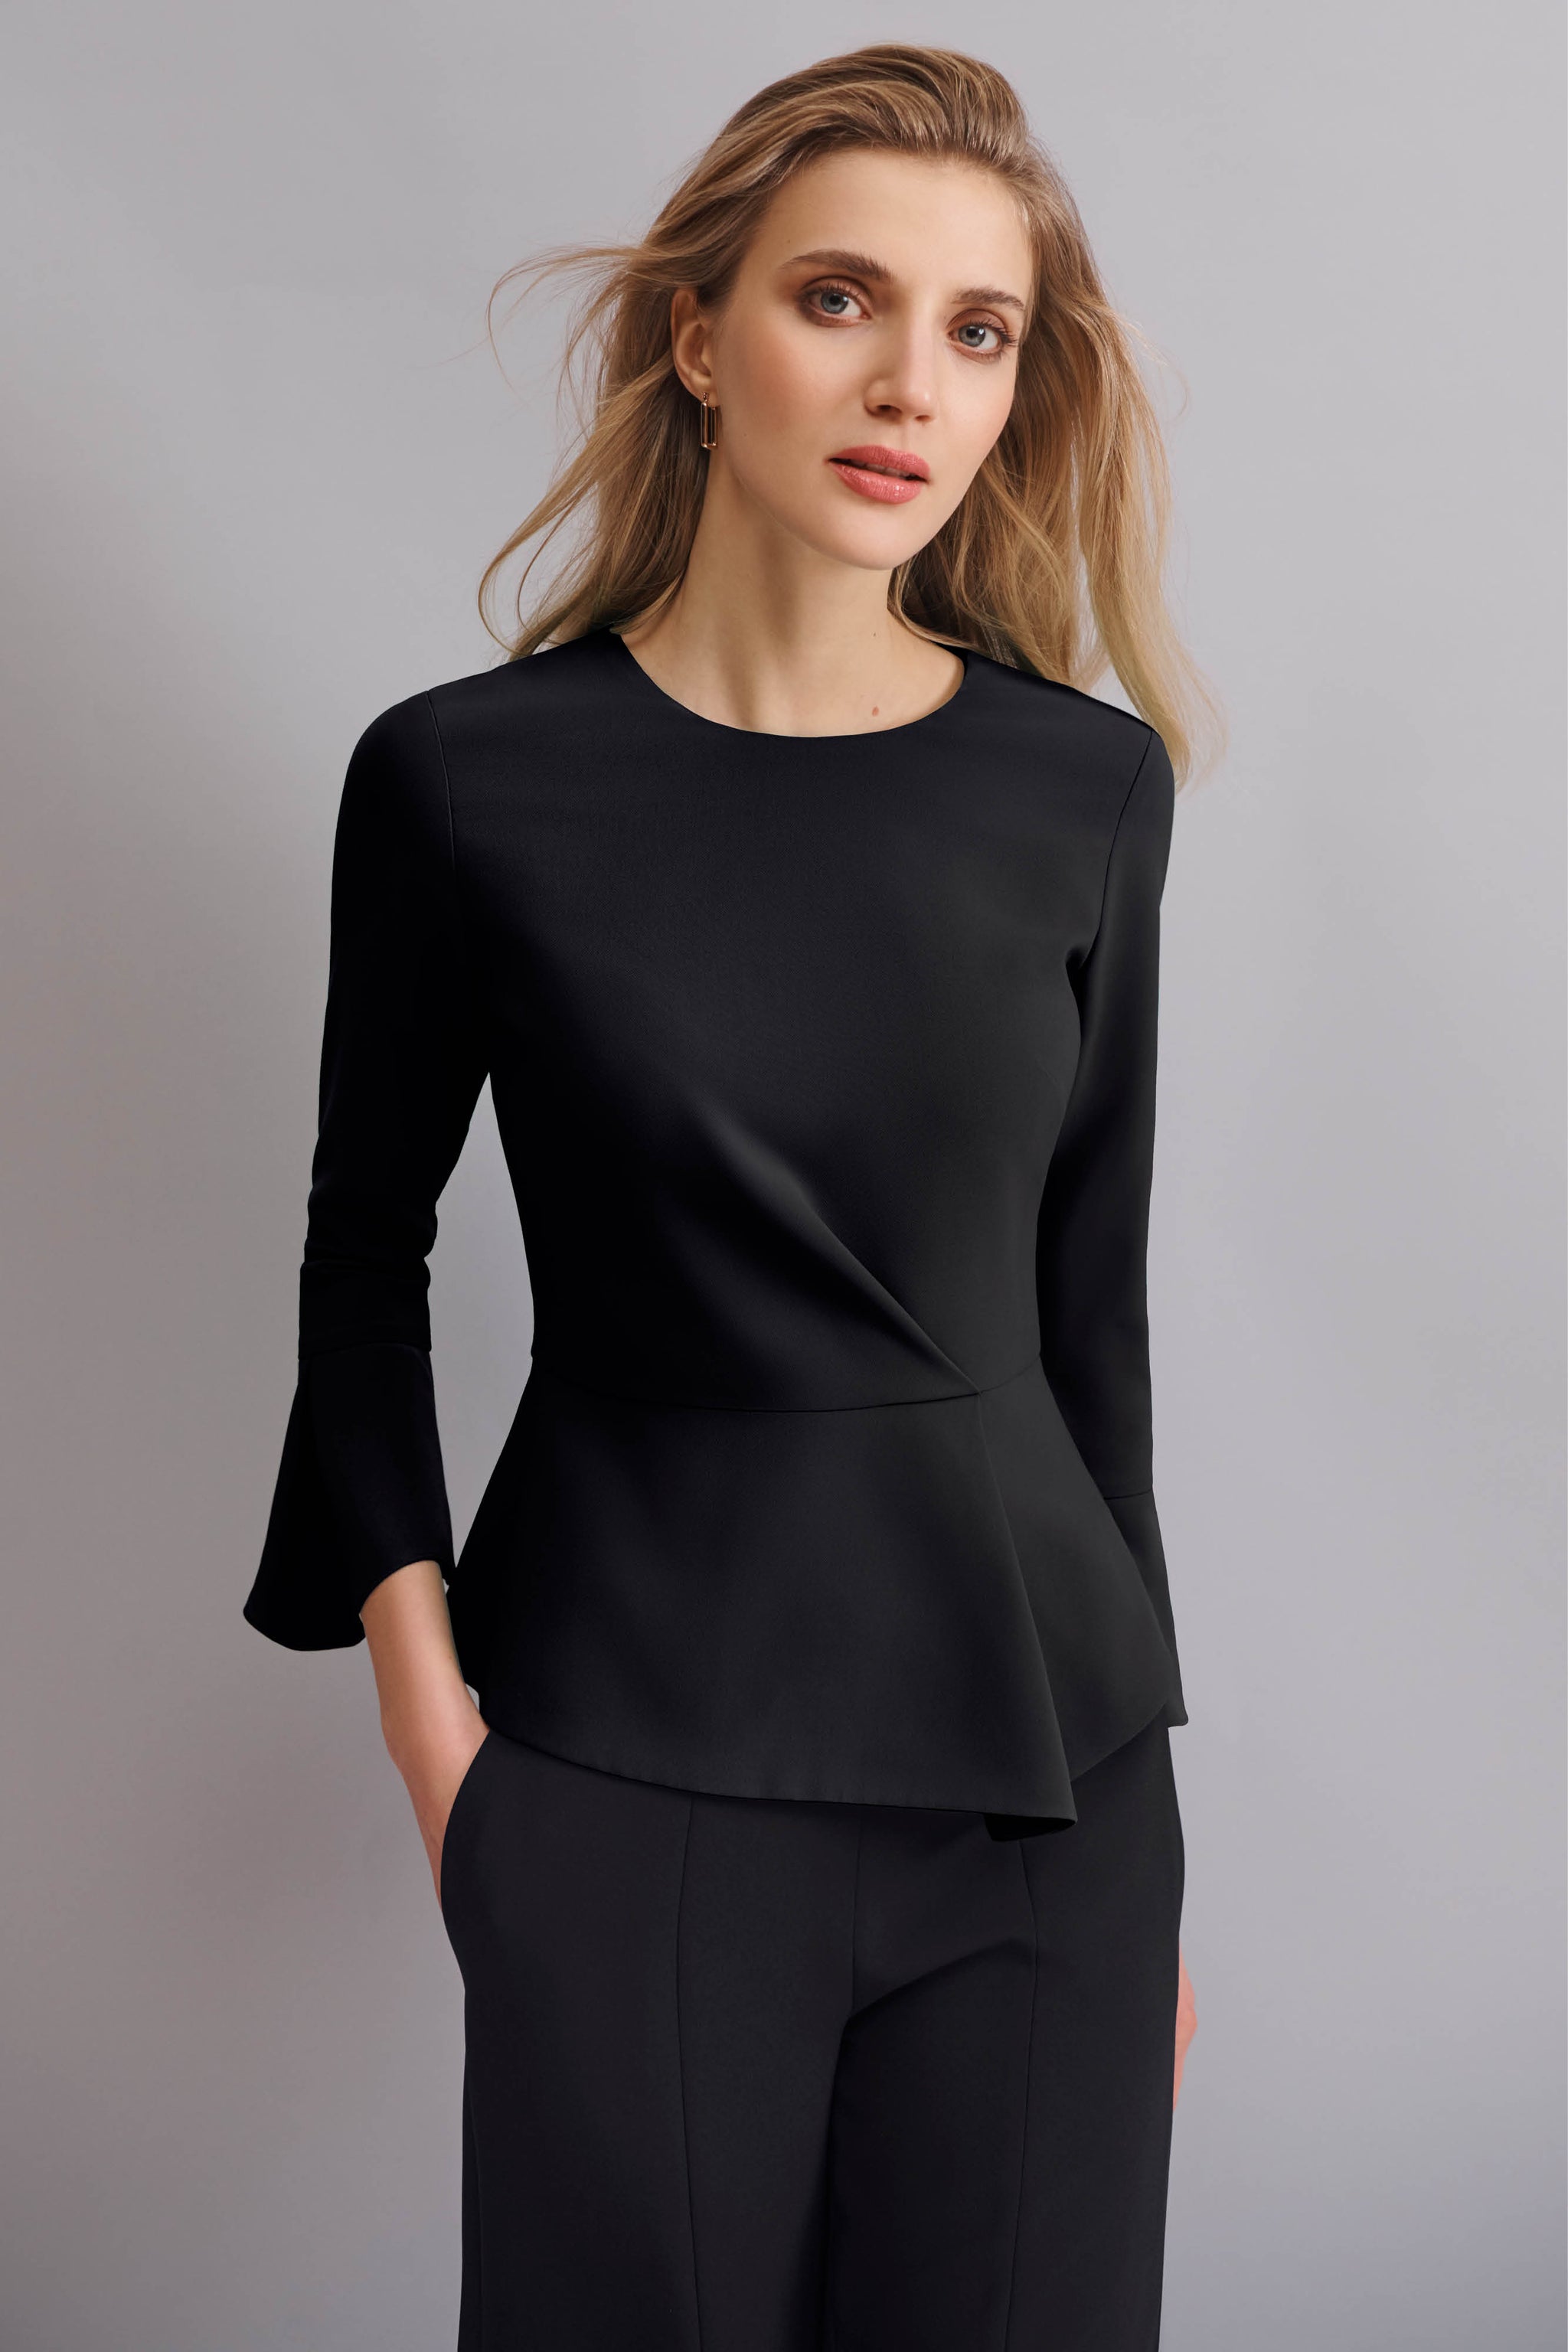 Chepstow Black Performance Tailoring Top